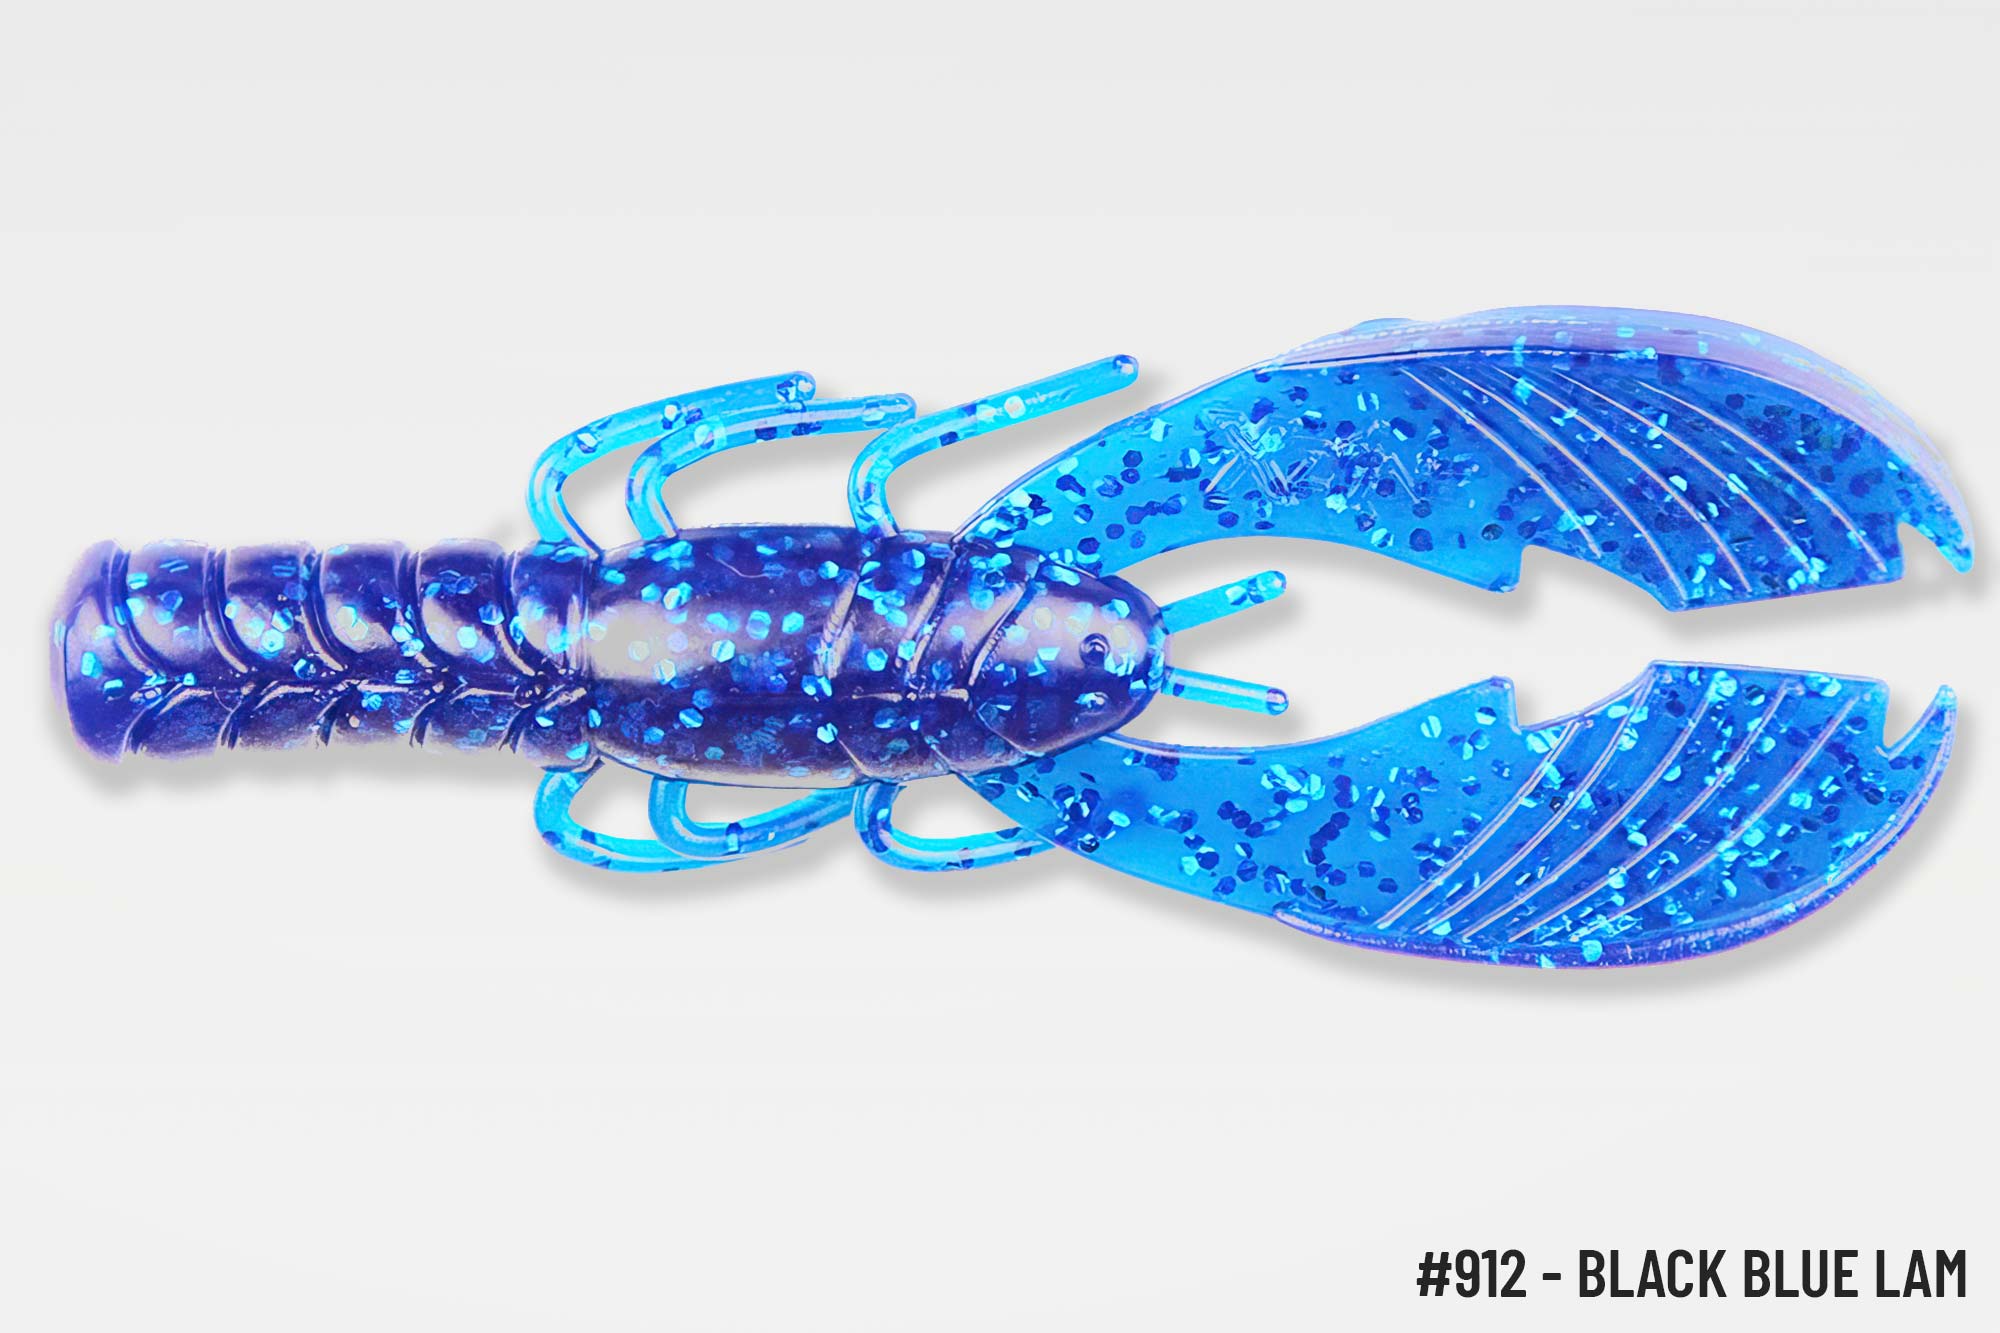 x Zone Lures Muscle Back Finesse Craw Black Blue Laminate / 3.25